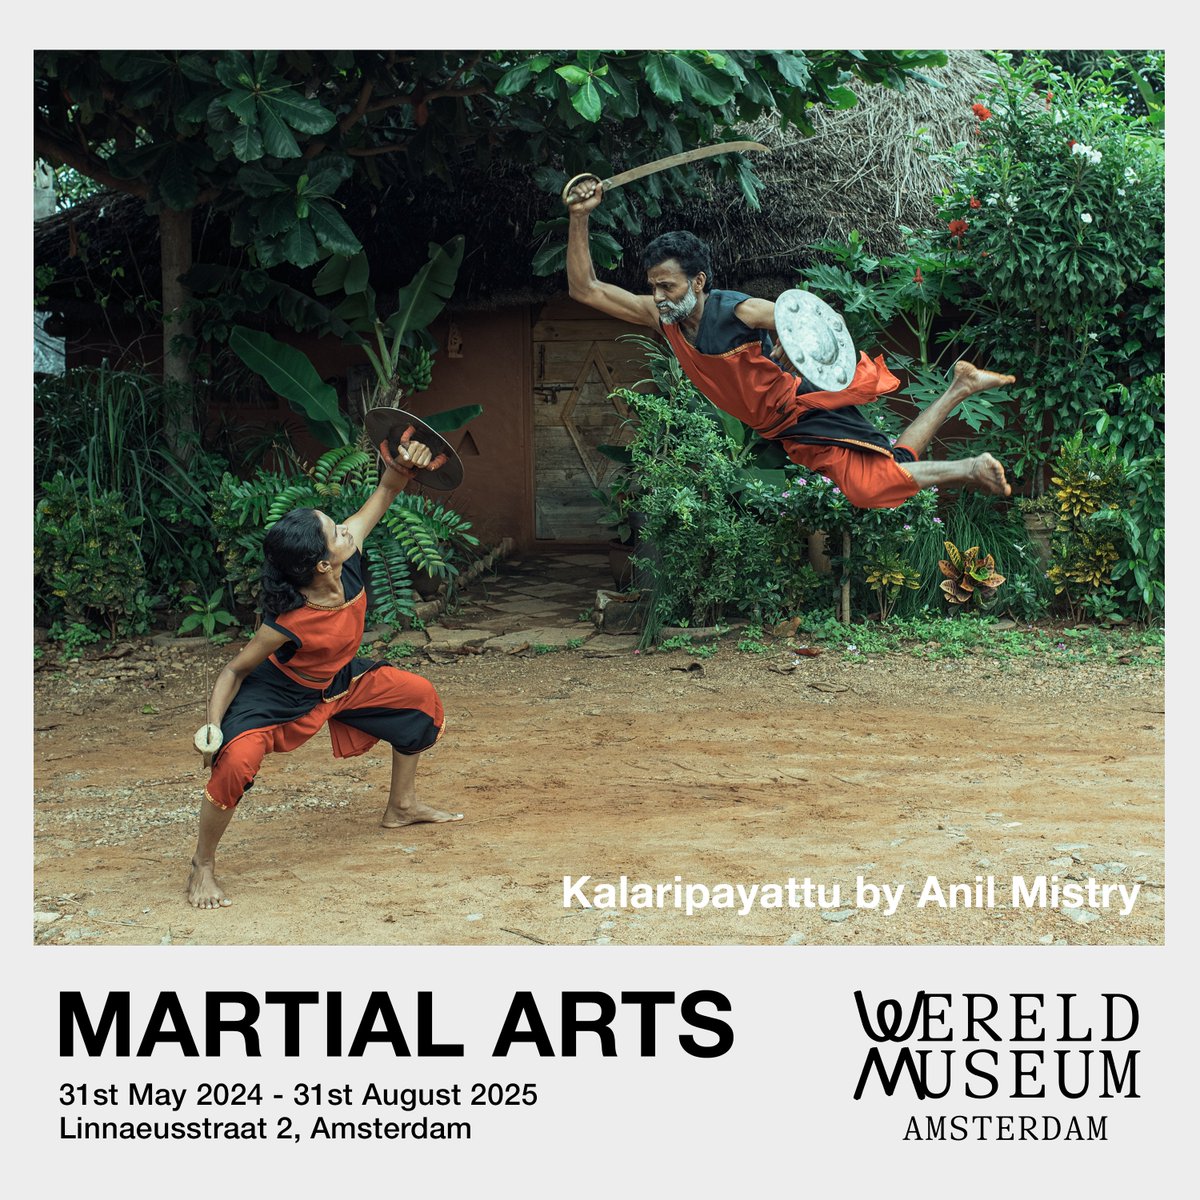 Exciting news- my photograph of a Kalari master and his wife captured in action in Bangalore will be a part of the Martial arts exhibition at @WM_Amsterdam this year ! more news here amsterdam.wereldmuseum.nl/en/whats-on/ex…  #photography #kalaripayattu #wereldmuseum #martialarts #kalari